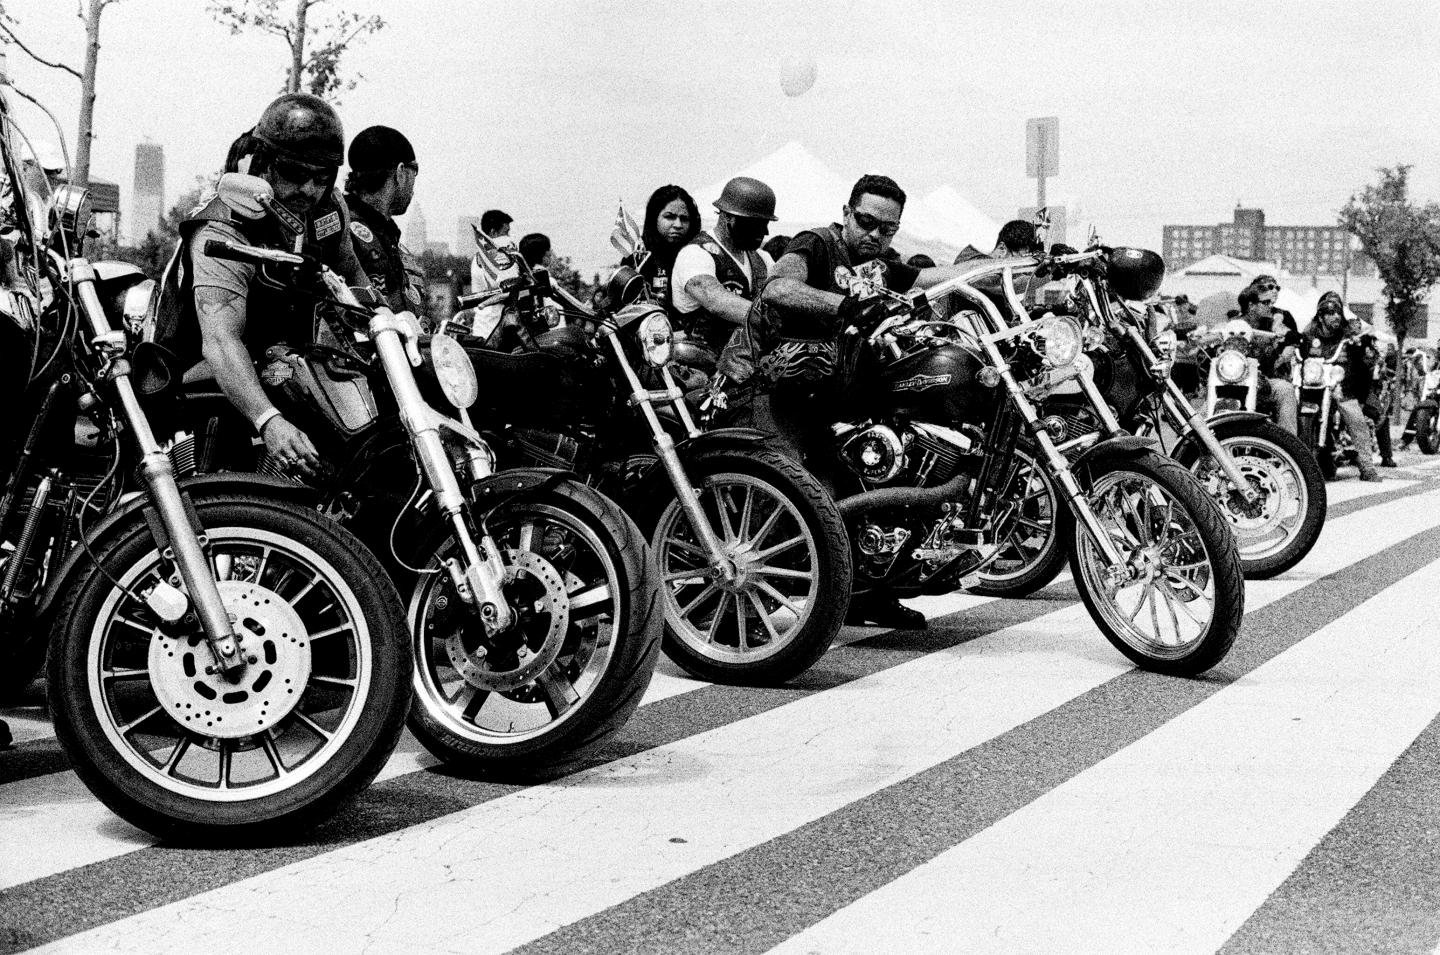 1440x955 > Motorcycle Club Wallpapers